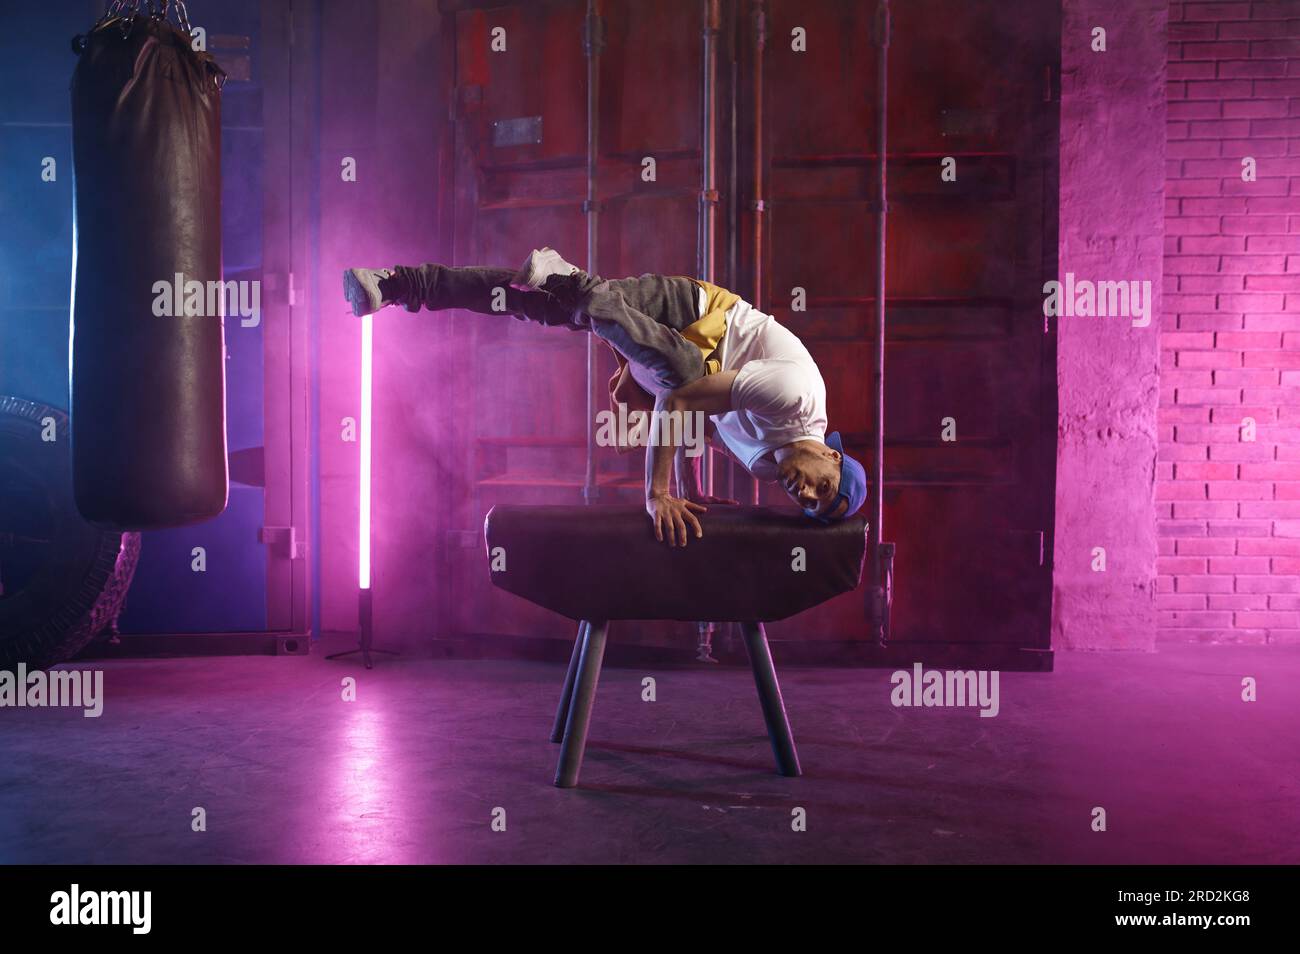 Male hip hop dancer on head stand doing acrobatic stunt Stock Photo